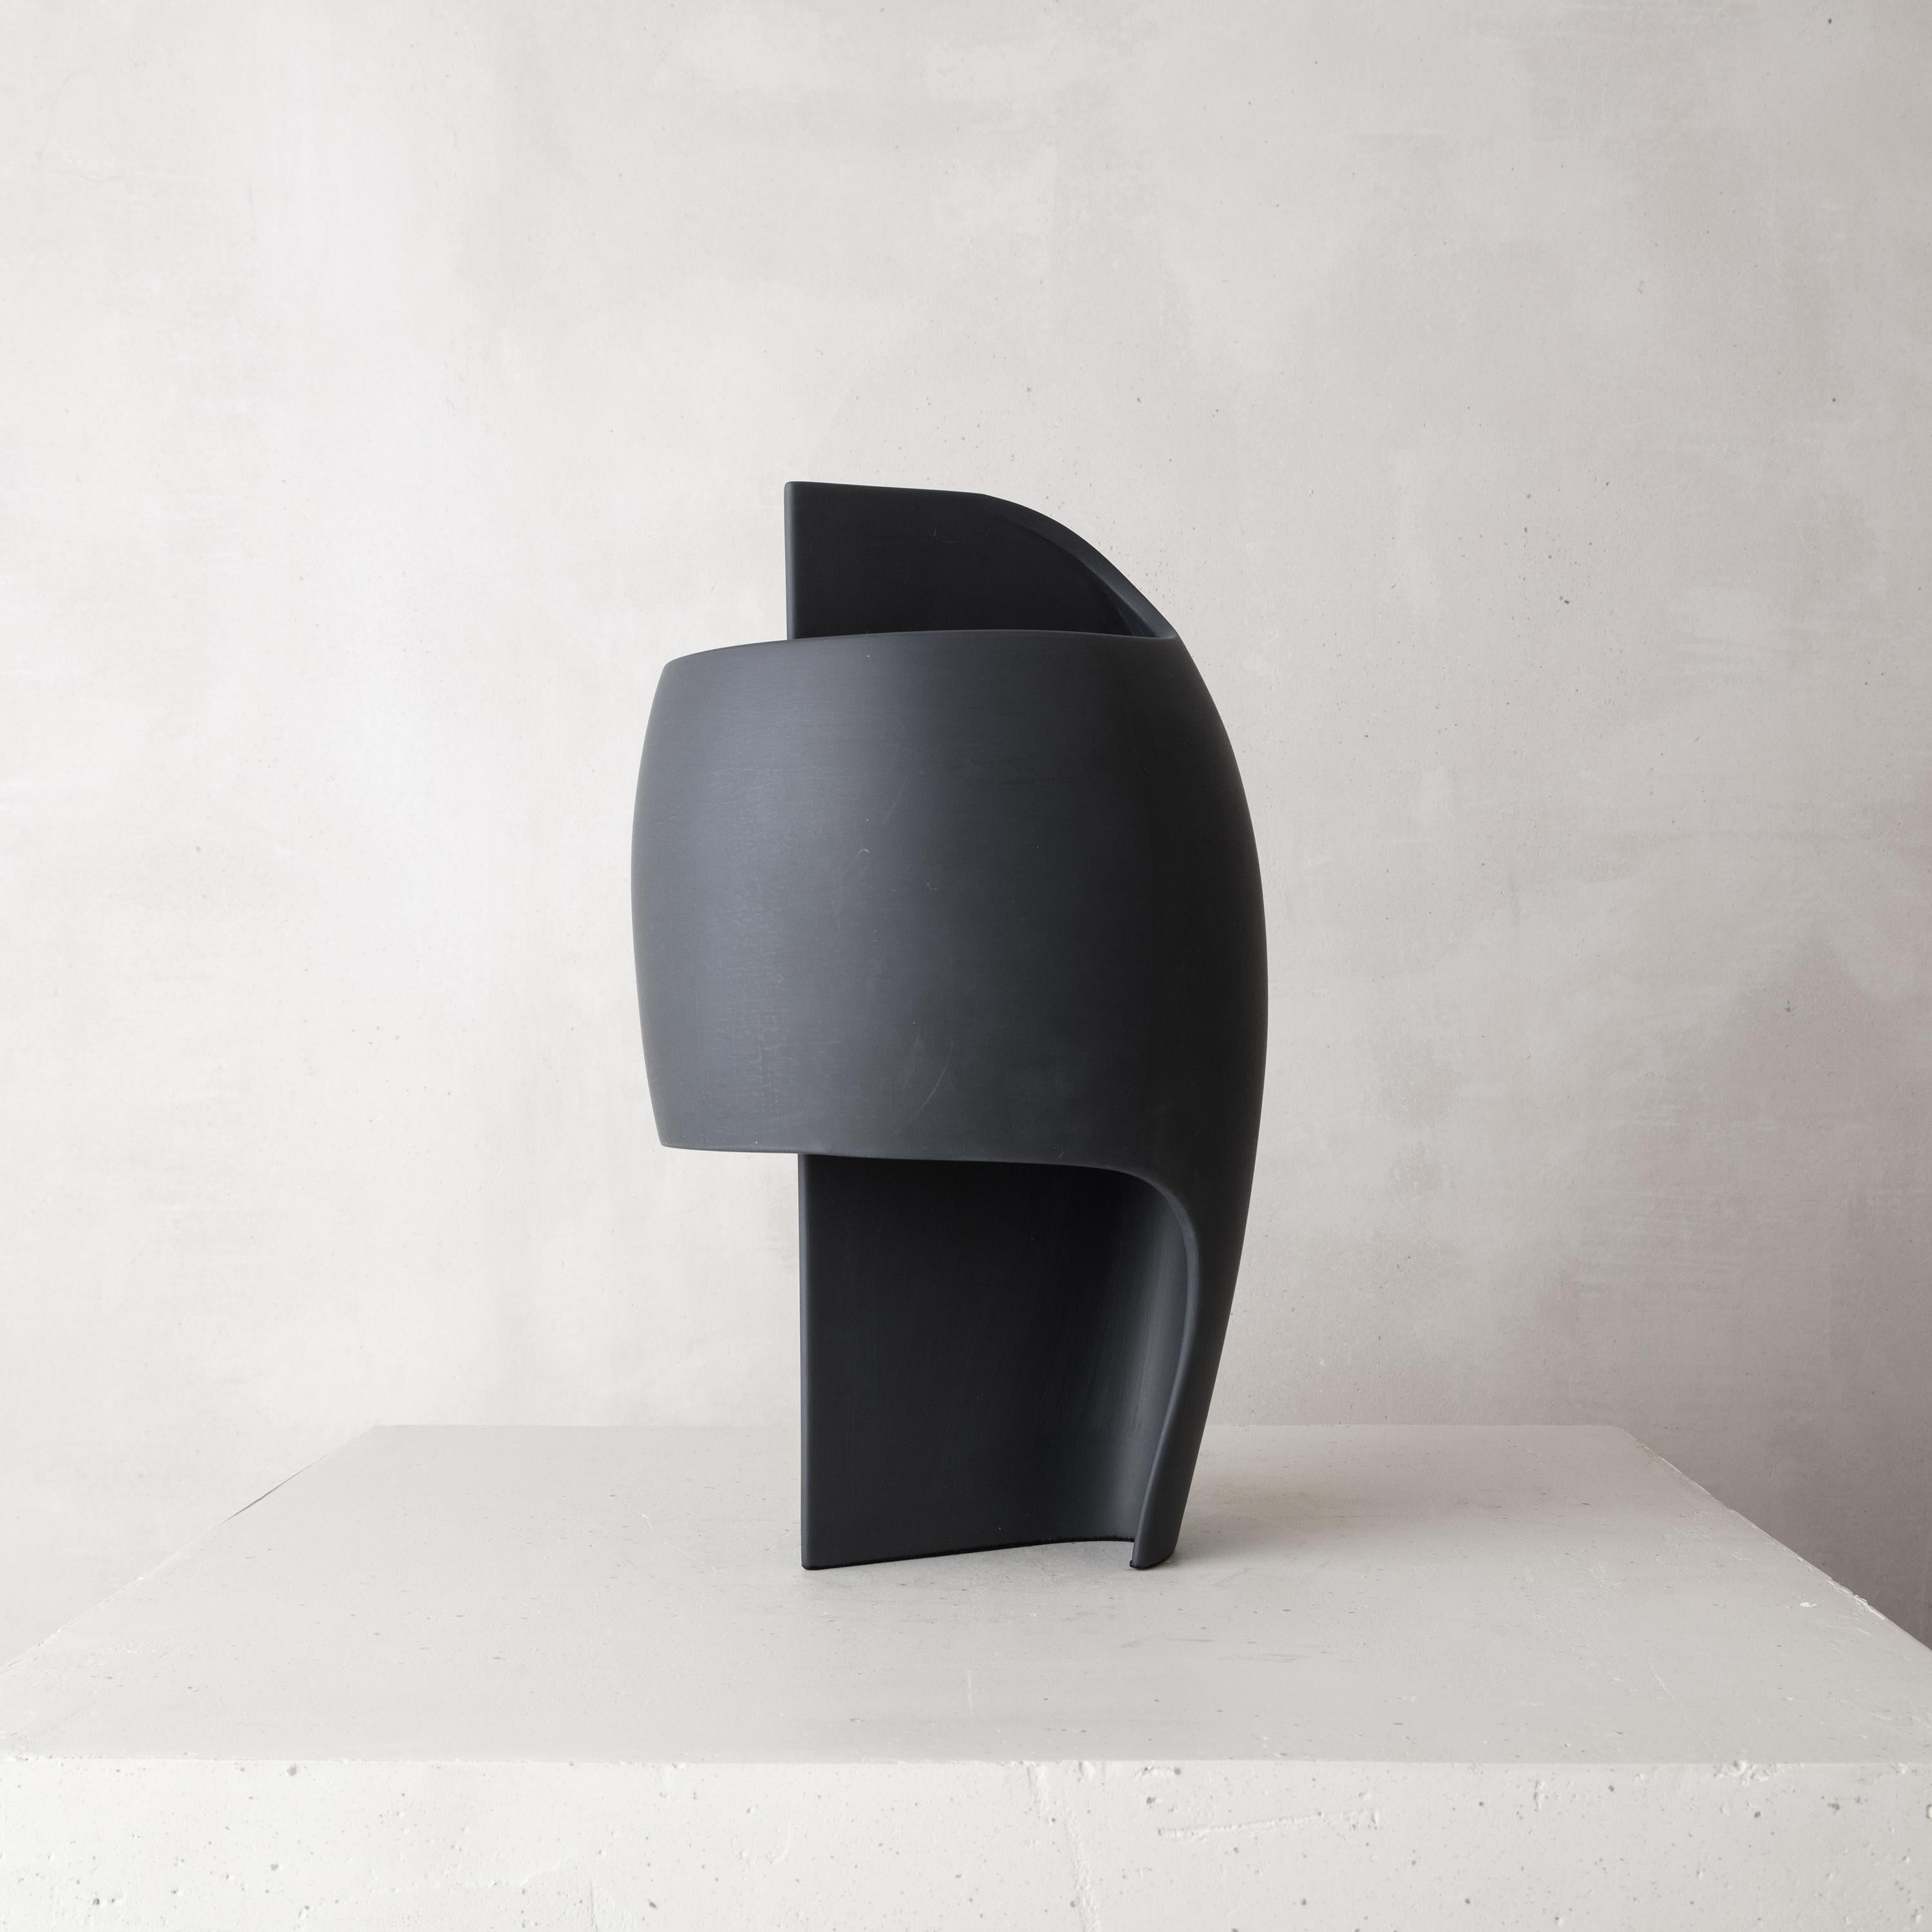 “An Element of Light between a shell and an organic curve...” — Thierry Dreyfus

Inspired by the movement of light and the motion inherent in a Brancusi sculpture, the B lamp is an Editions Courbet work created in collaboration with Thierry